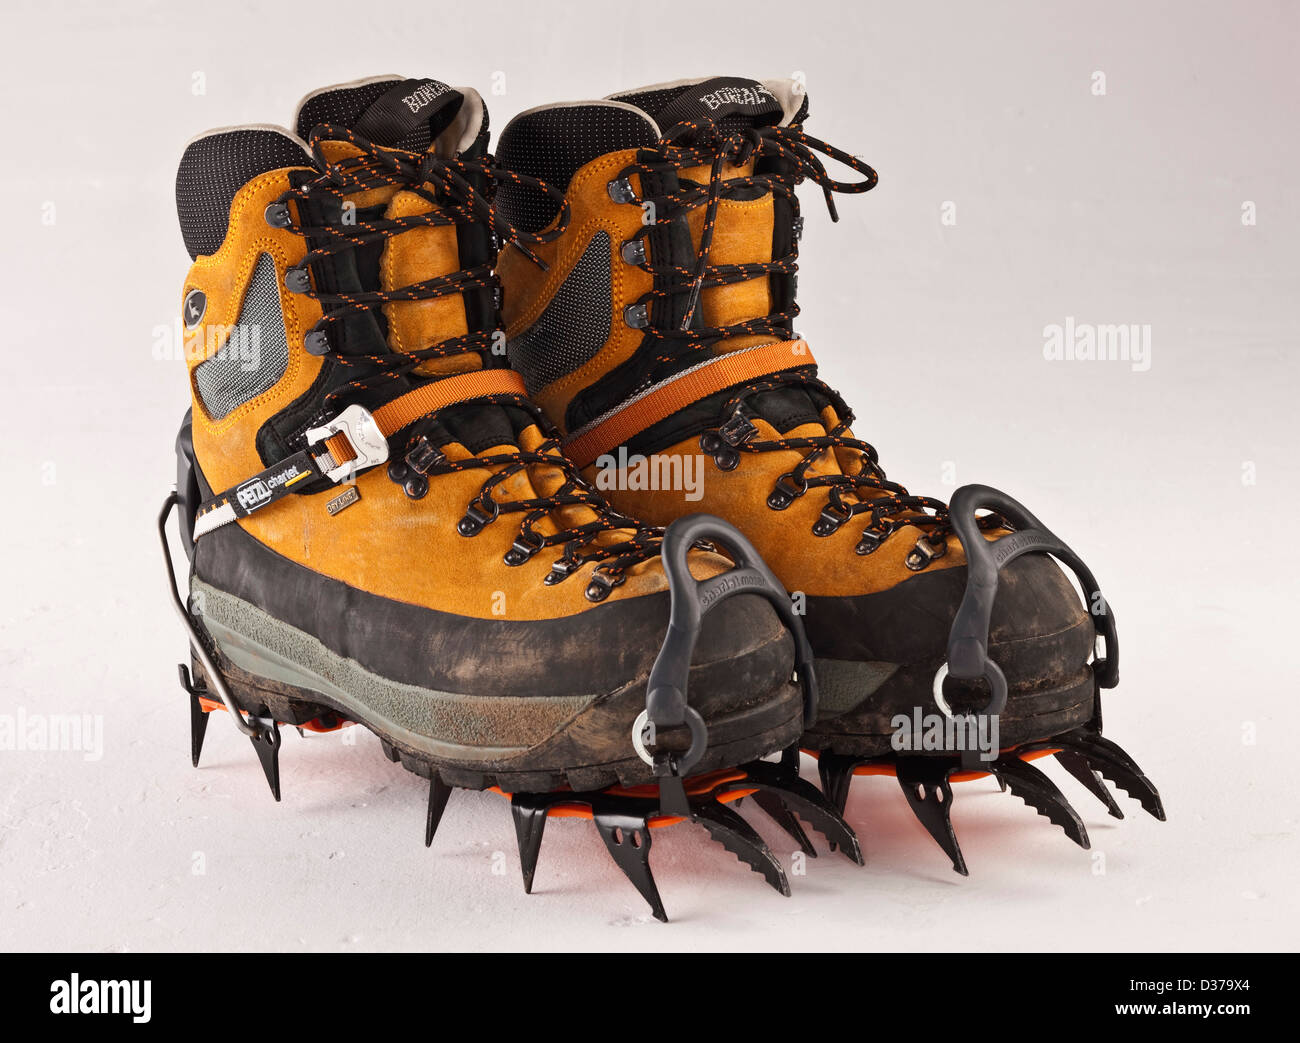 Buy > boot spikes for tree climbing > in stock